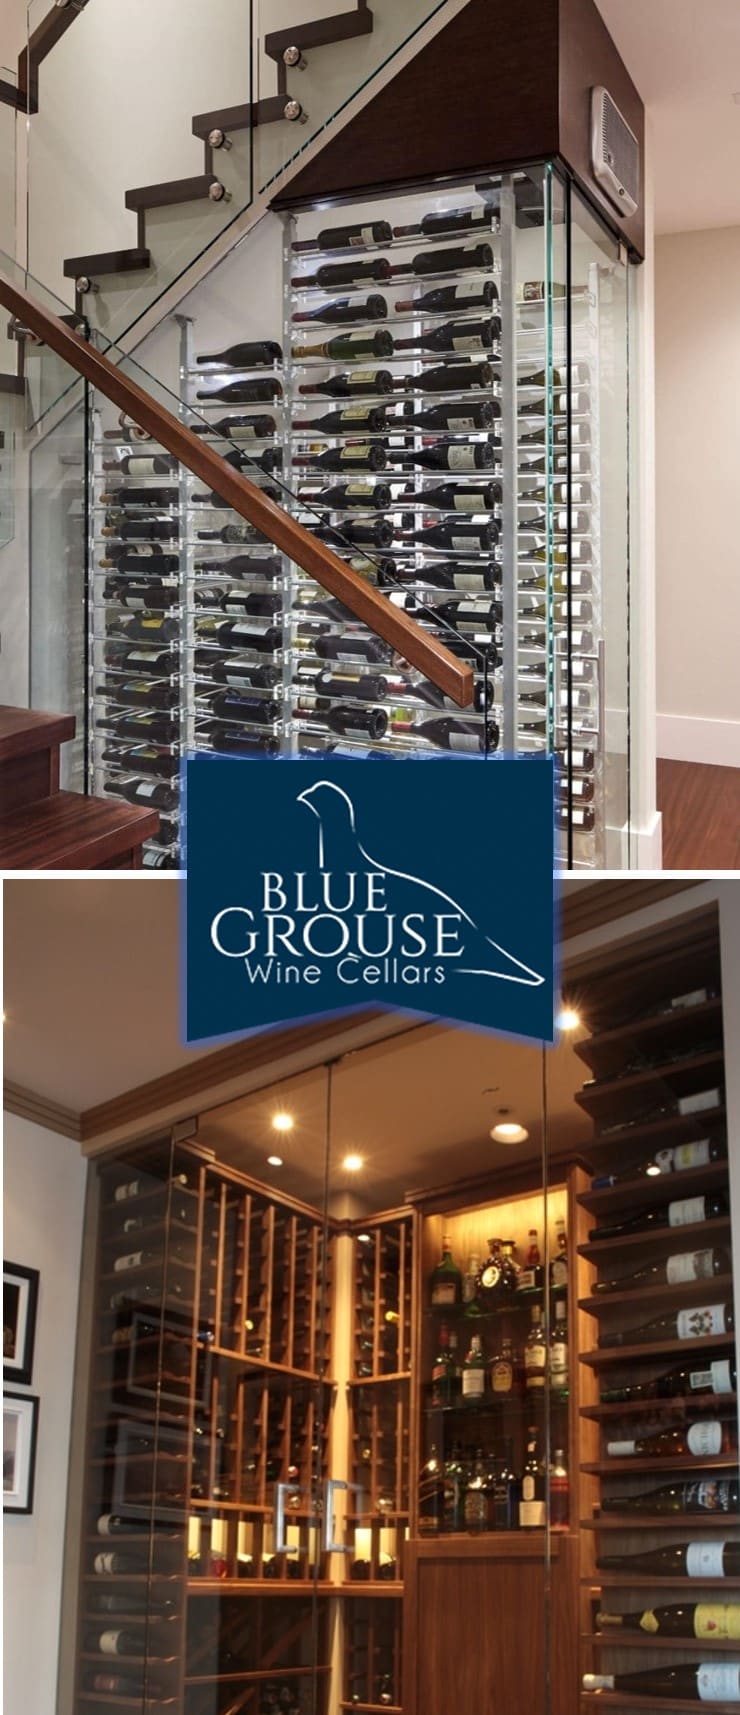 Refrigerated Wine Cellars by Blue Grouse Wine Cellars